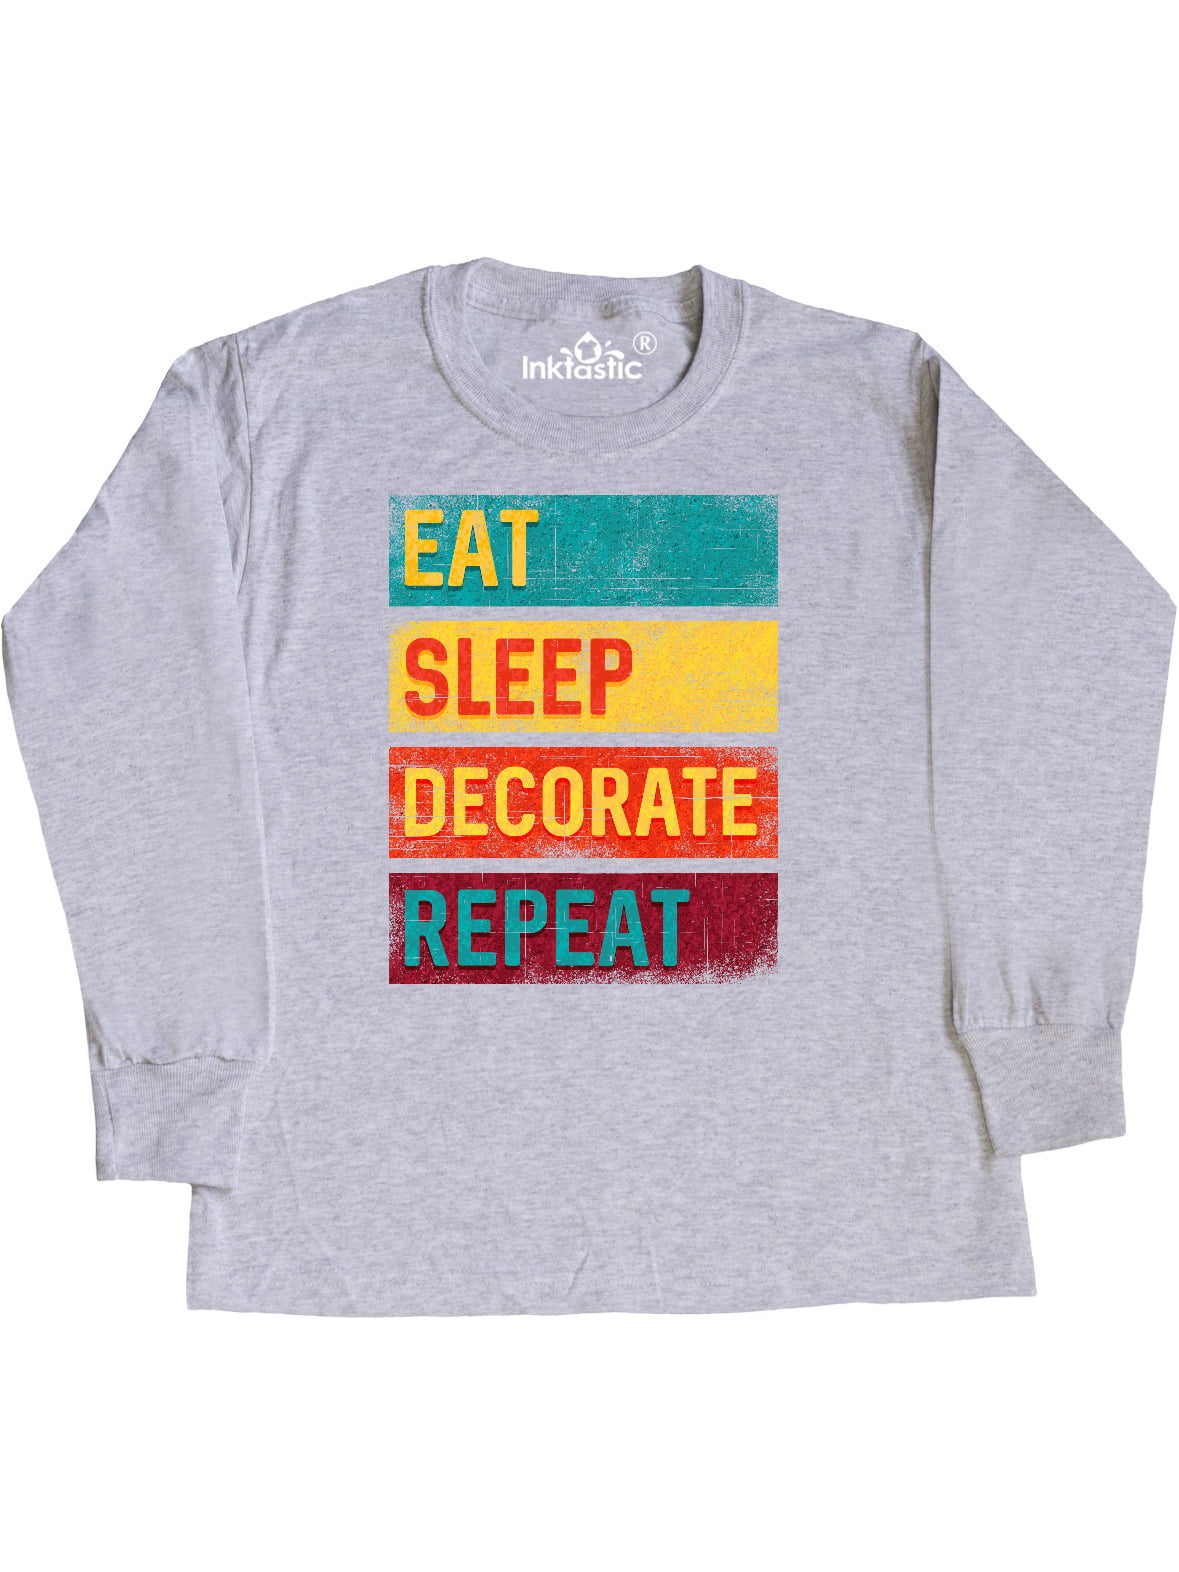 EAT SLEEP PAINT REPEAT Funny T-Shirt for a Paint and Decorator Workwear T-Shirt 